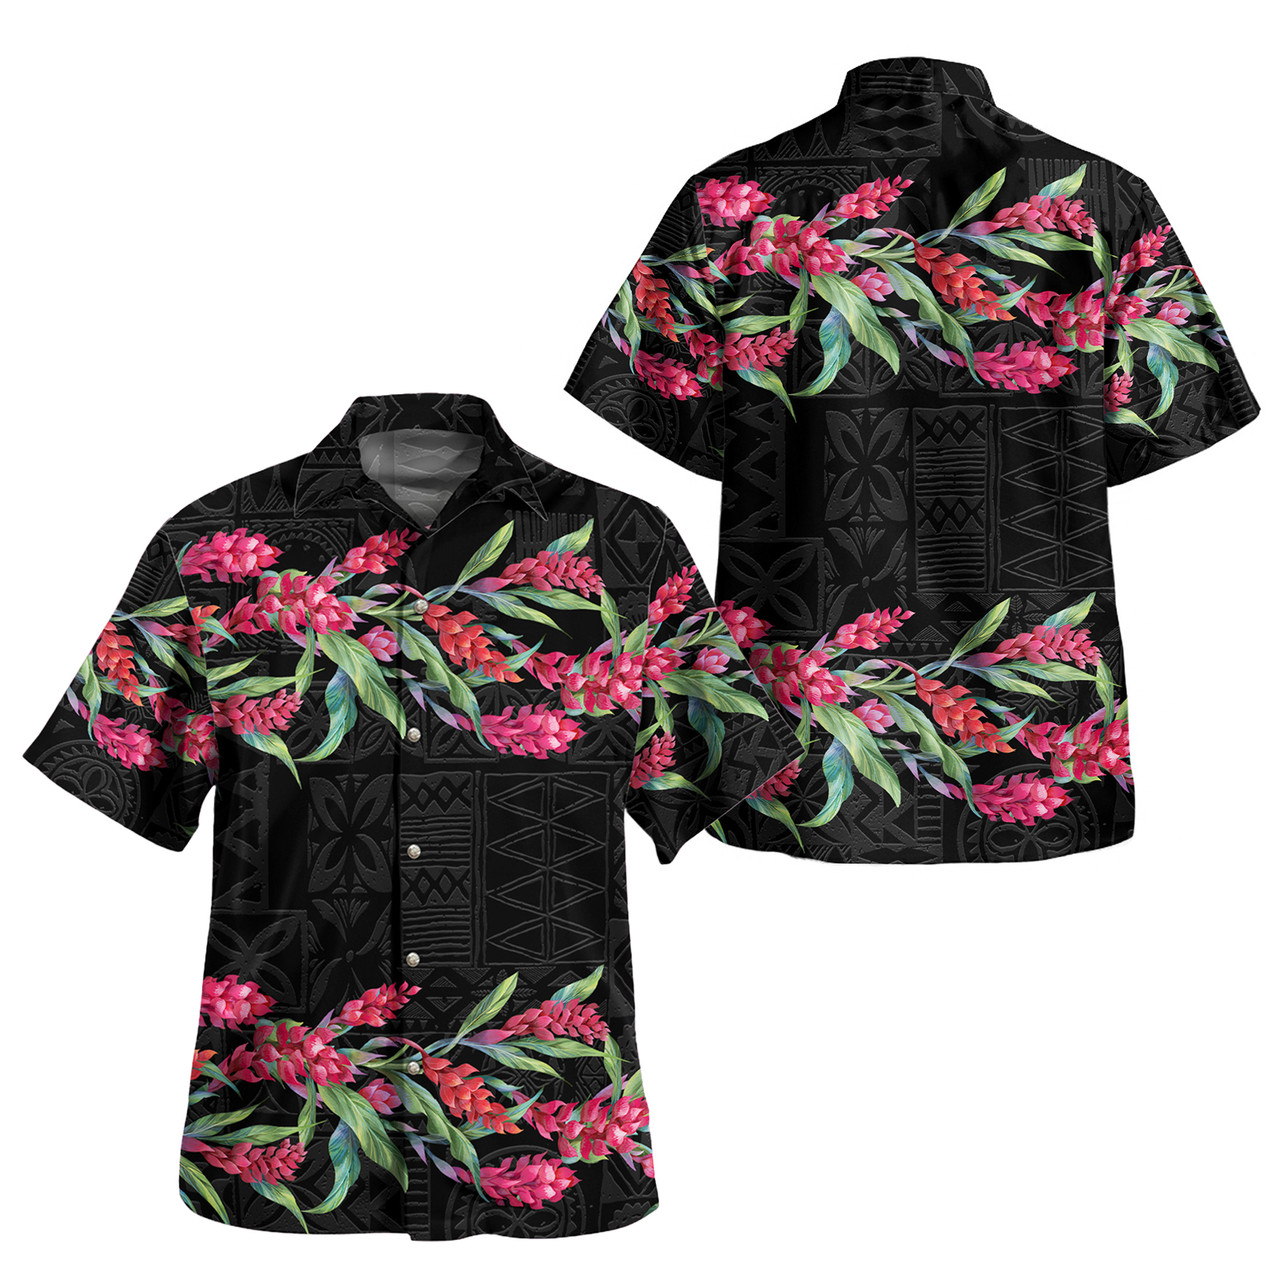 Combo Puletasi And Shirt Ginger Flowers With Polynesian Motif